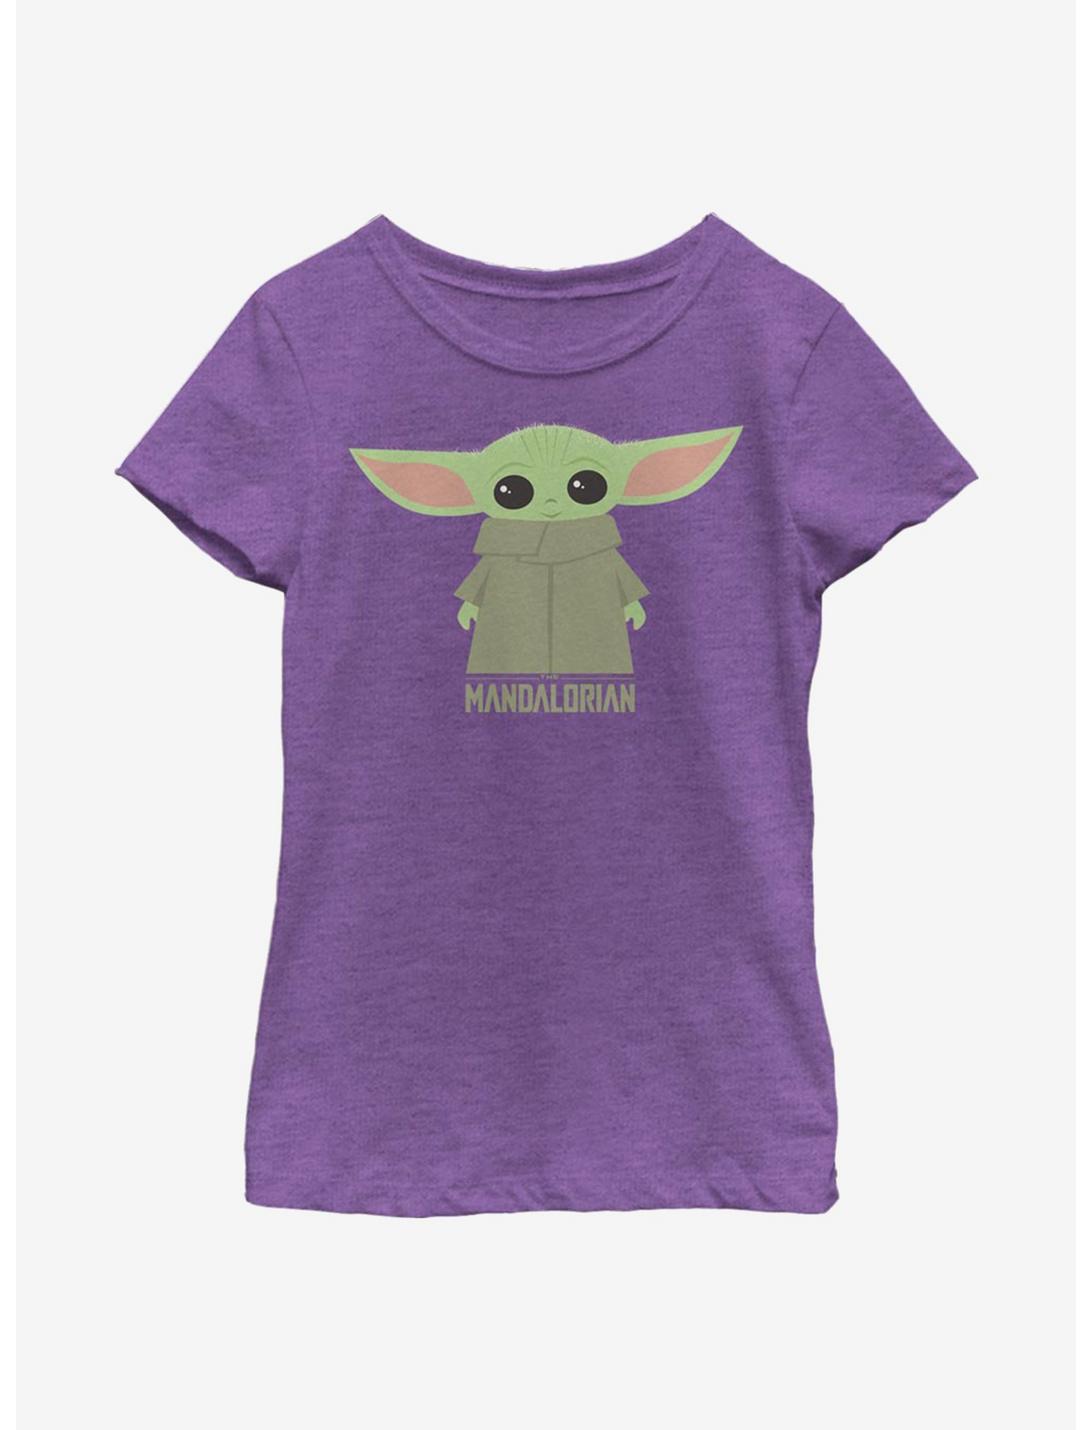 Star Wars The Mandalorian The Child Cute Stance Youth Girls T-Shirt, PURPLE BERRY, hi-res